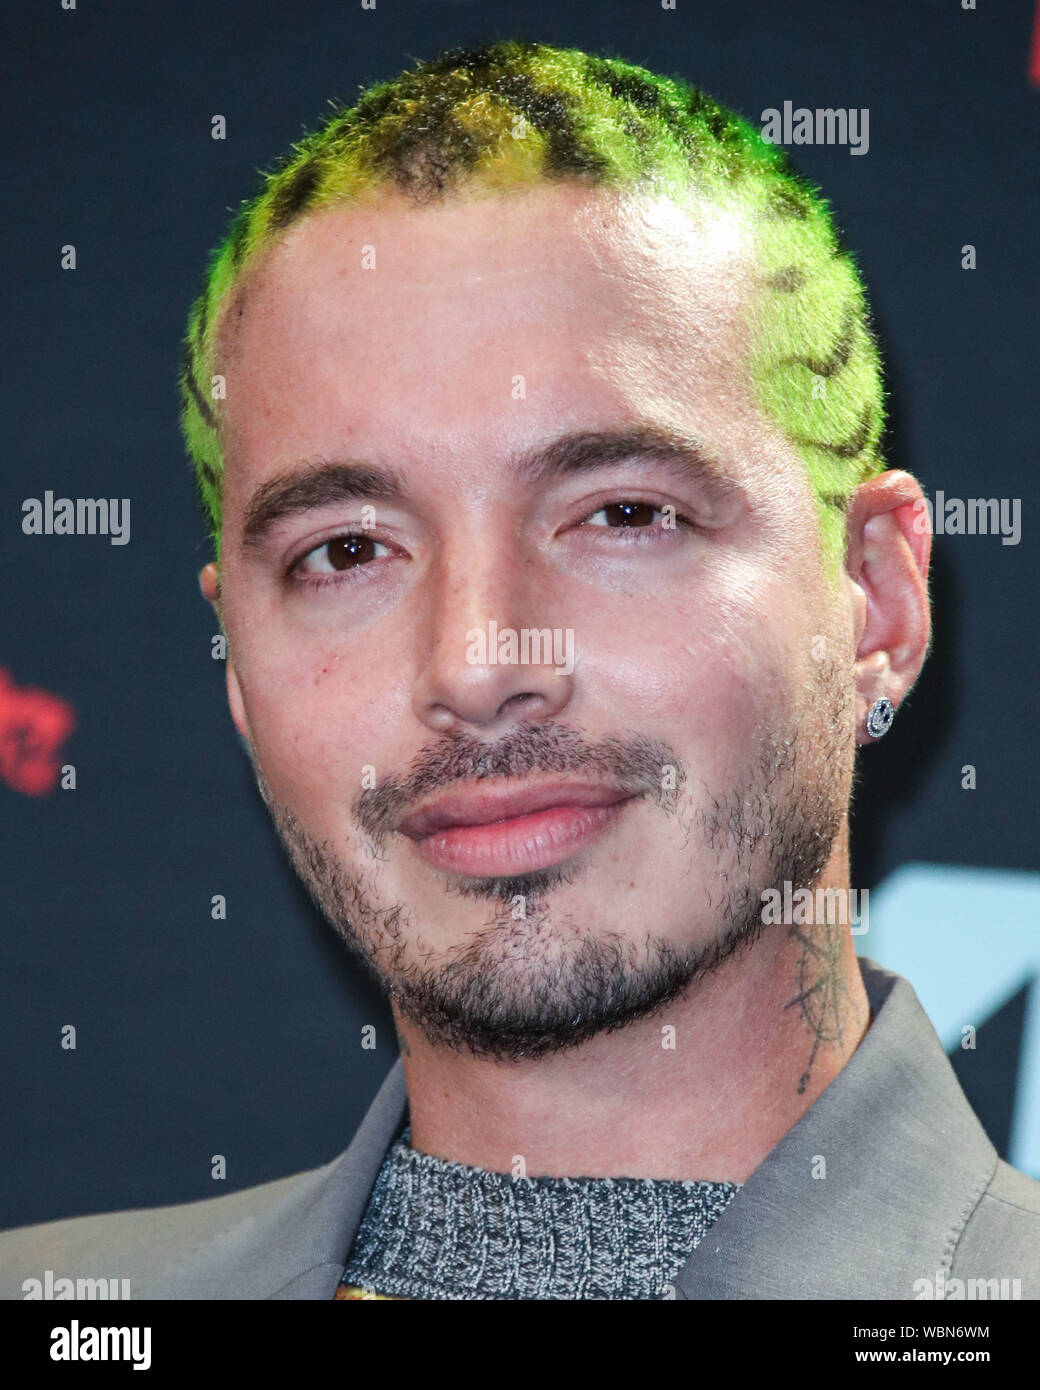 J Balvin editorial stock image. Image of movie, style - 168948854